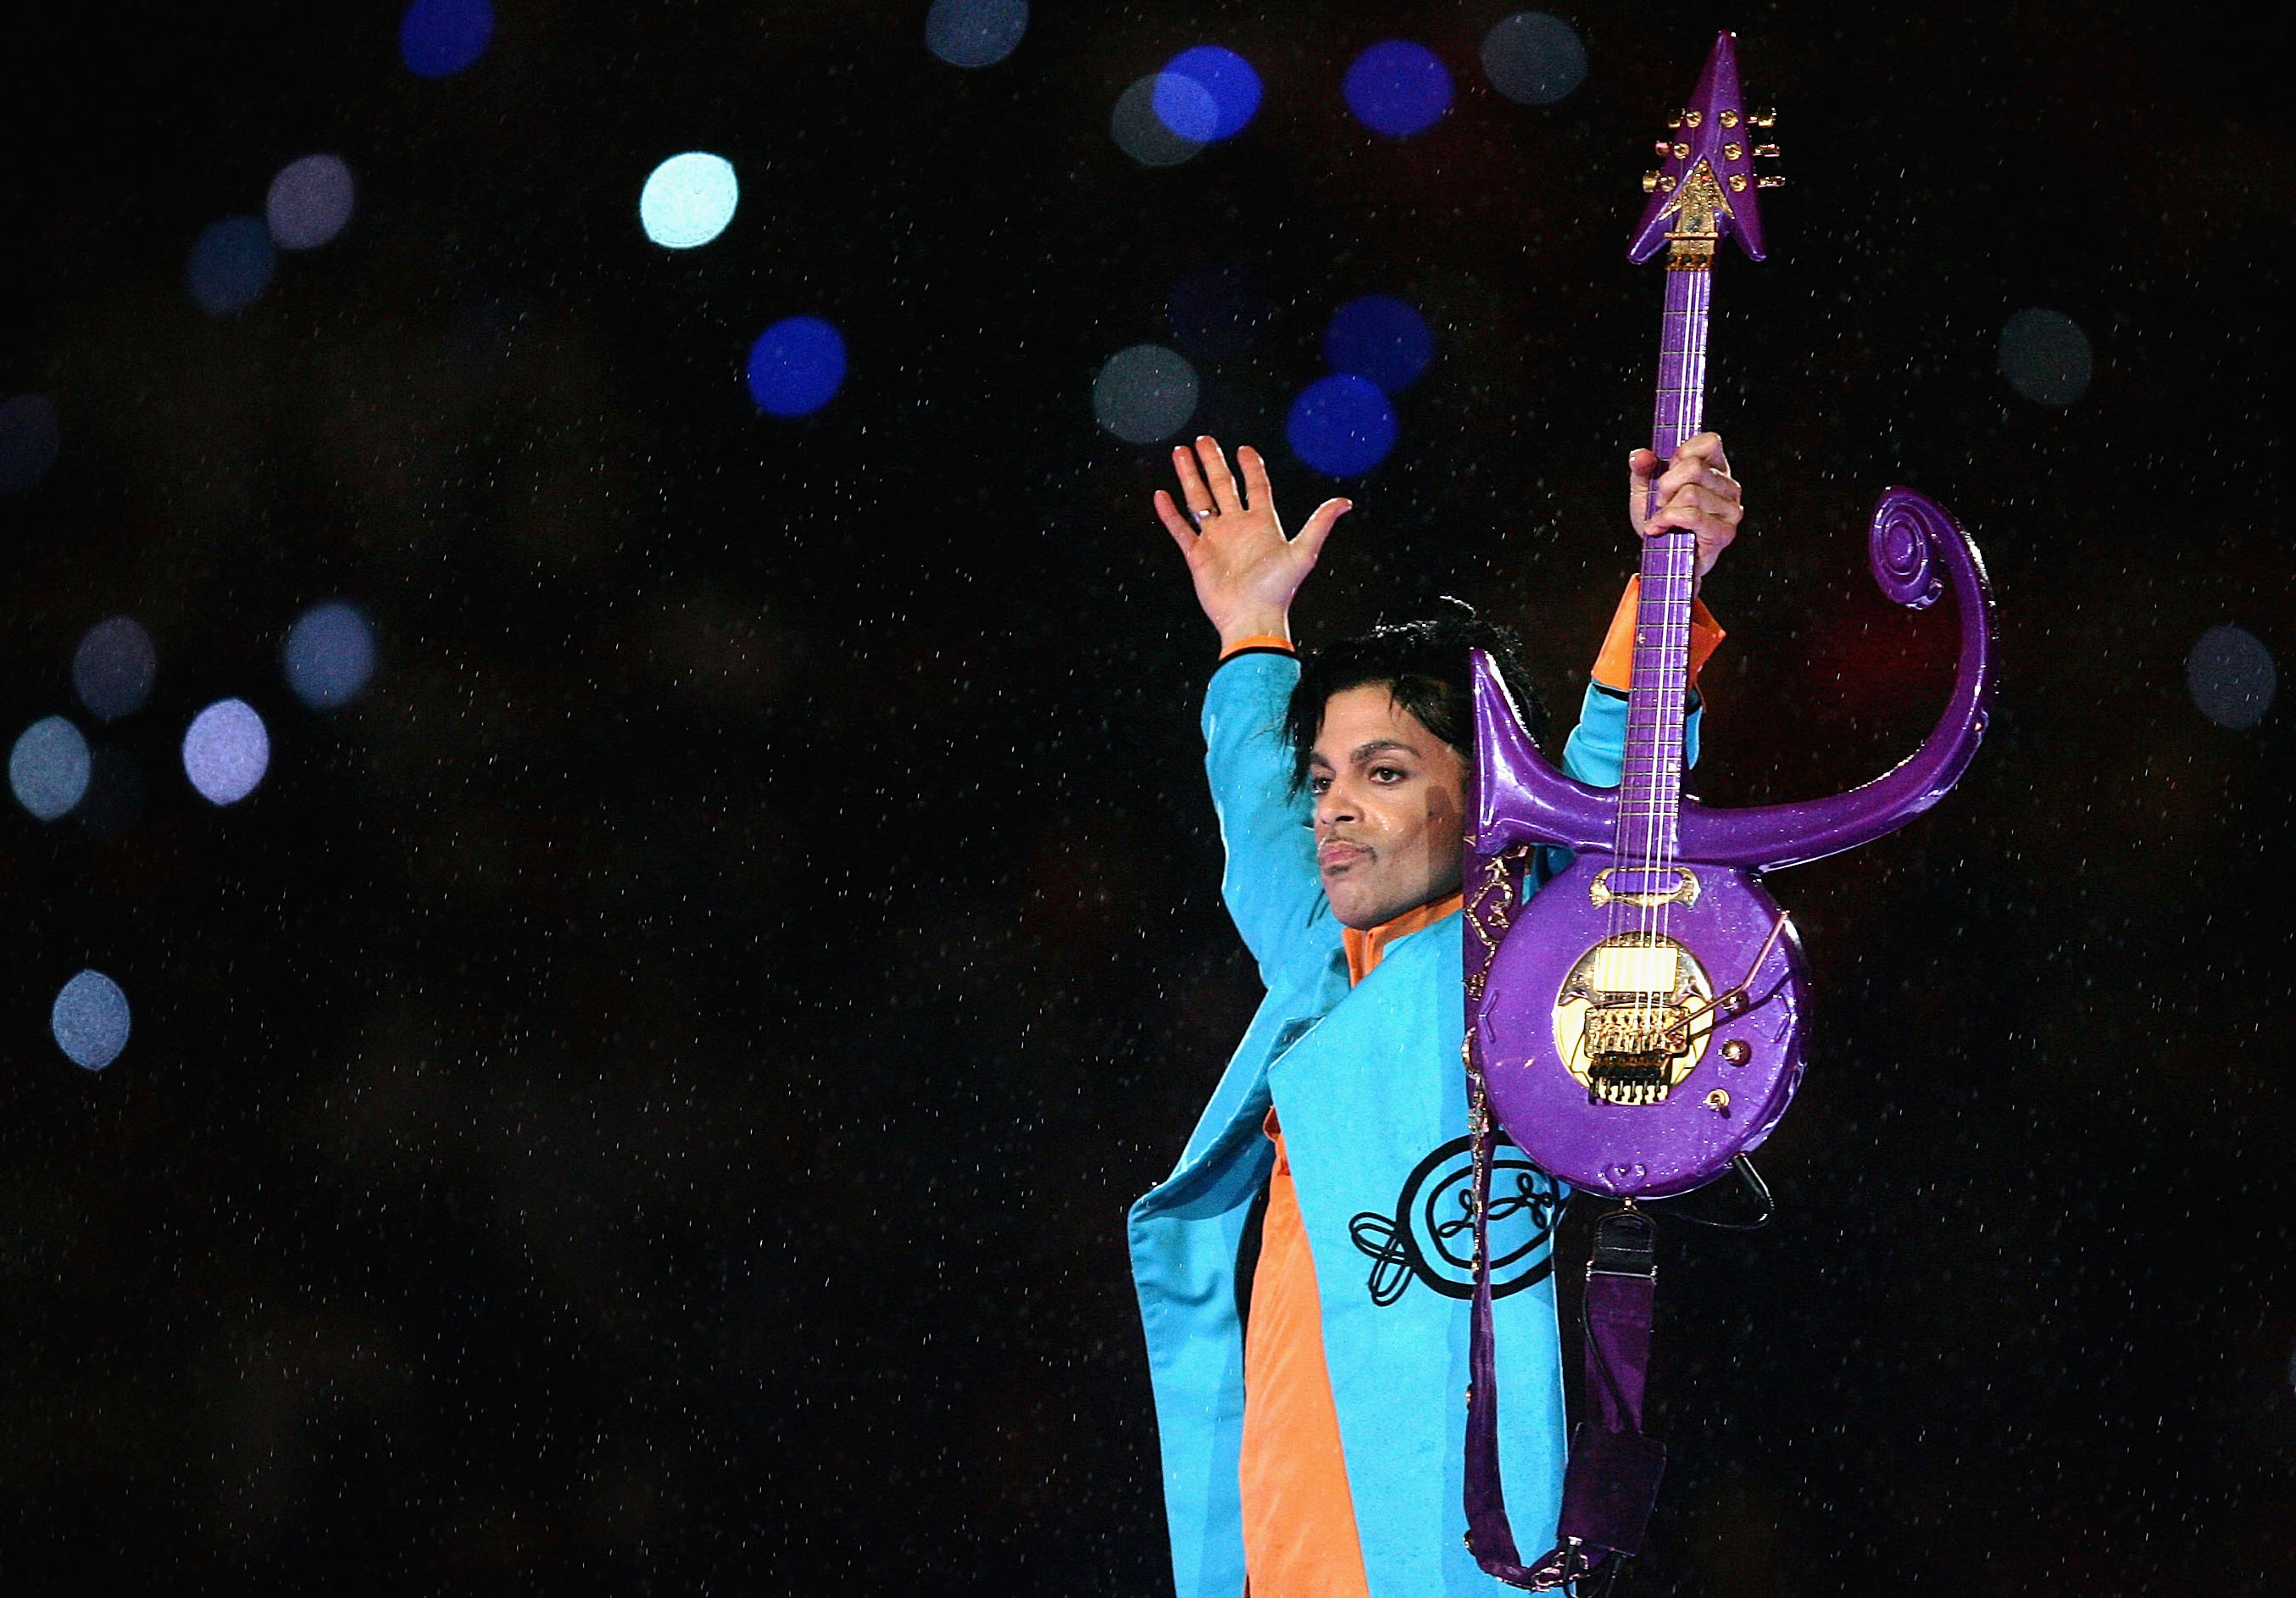 Prince performs during half-time at Super Bowl XLI on February 4, 2007 in Miami, Fla.